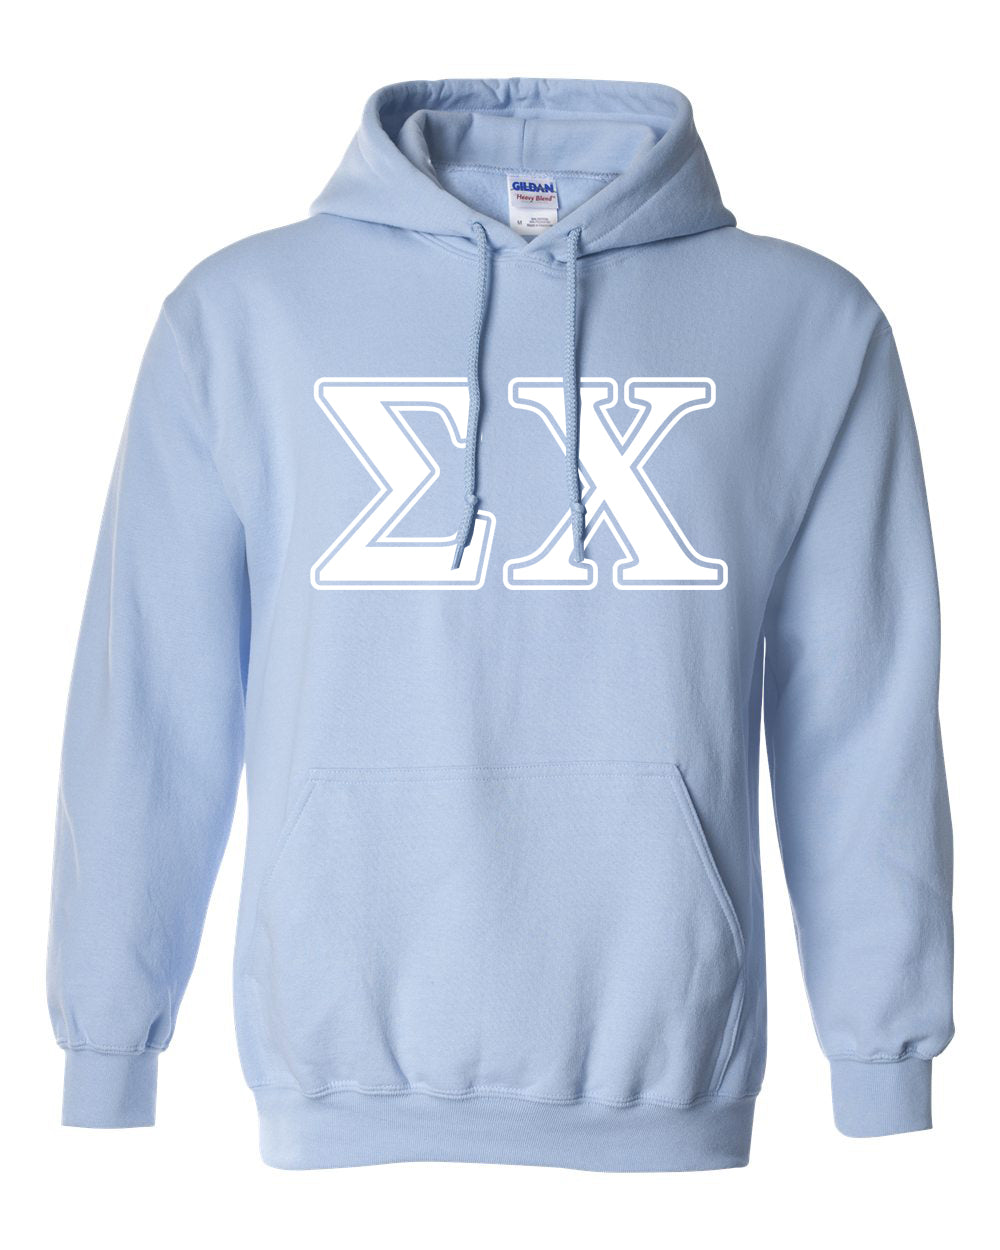 a light blue hoodie with the letter x on it